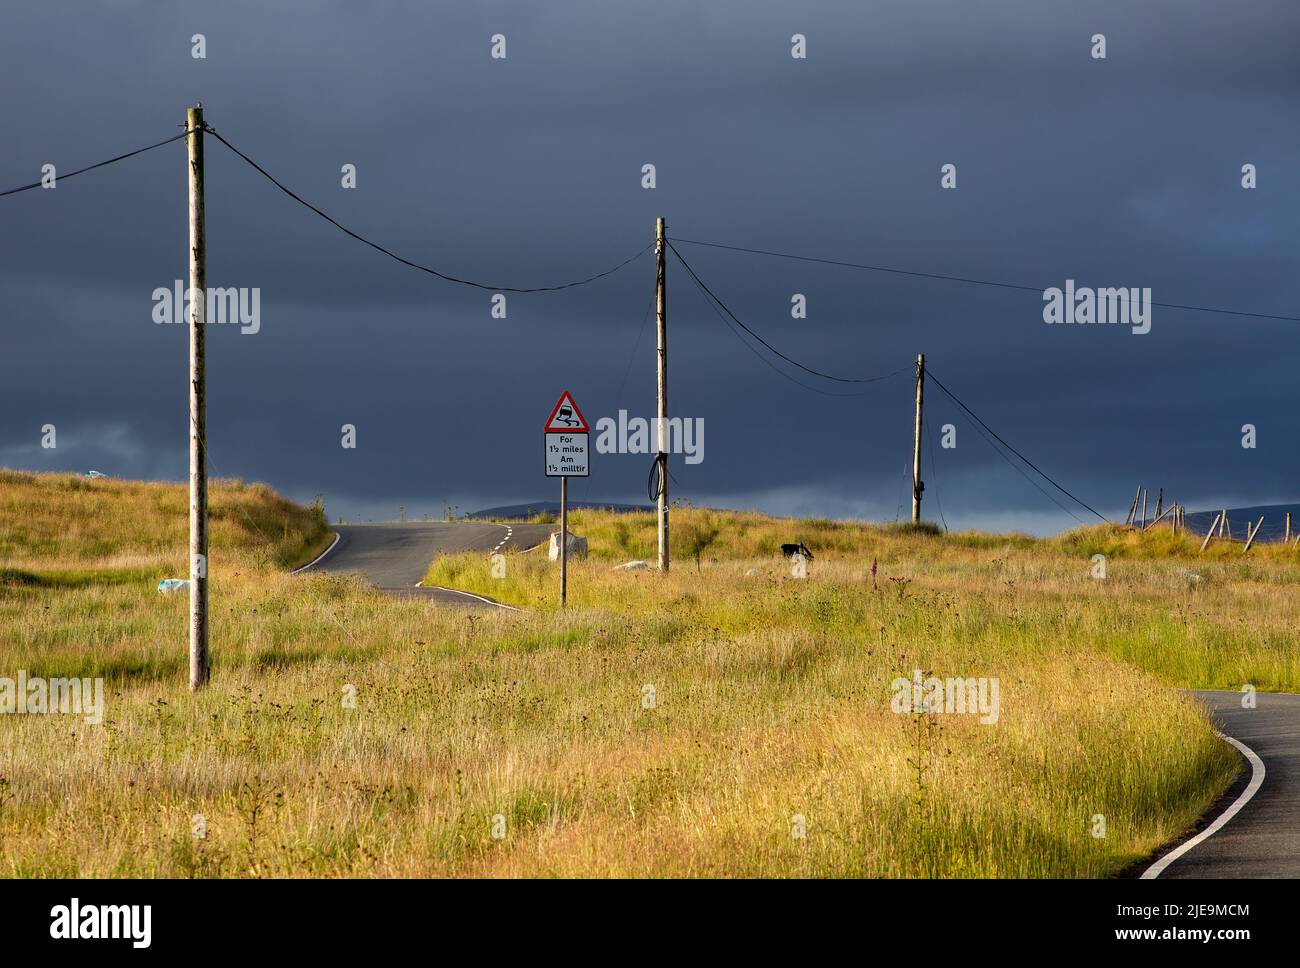 A bilingual English and Welsh road sign and utility or telegraph poles on Gwrhyd mountain in the Swansea Valley, South Wales UK Stock Photo